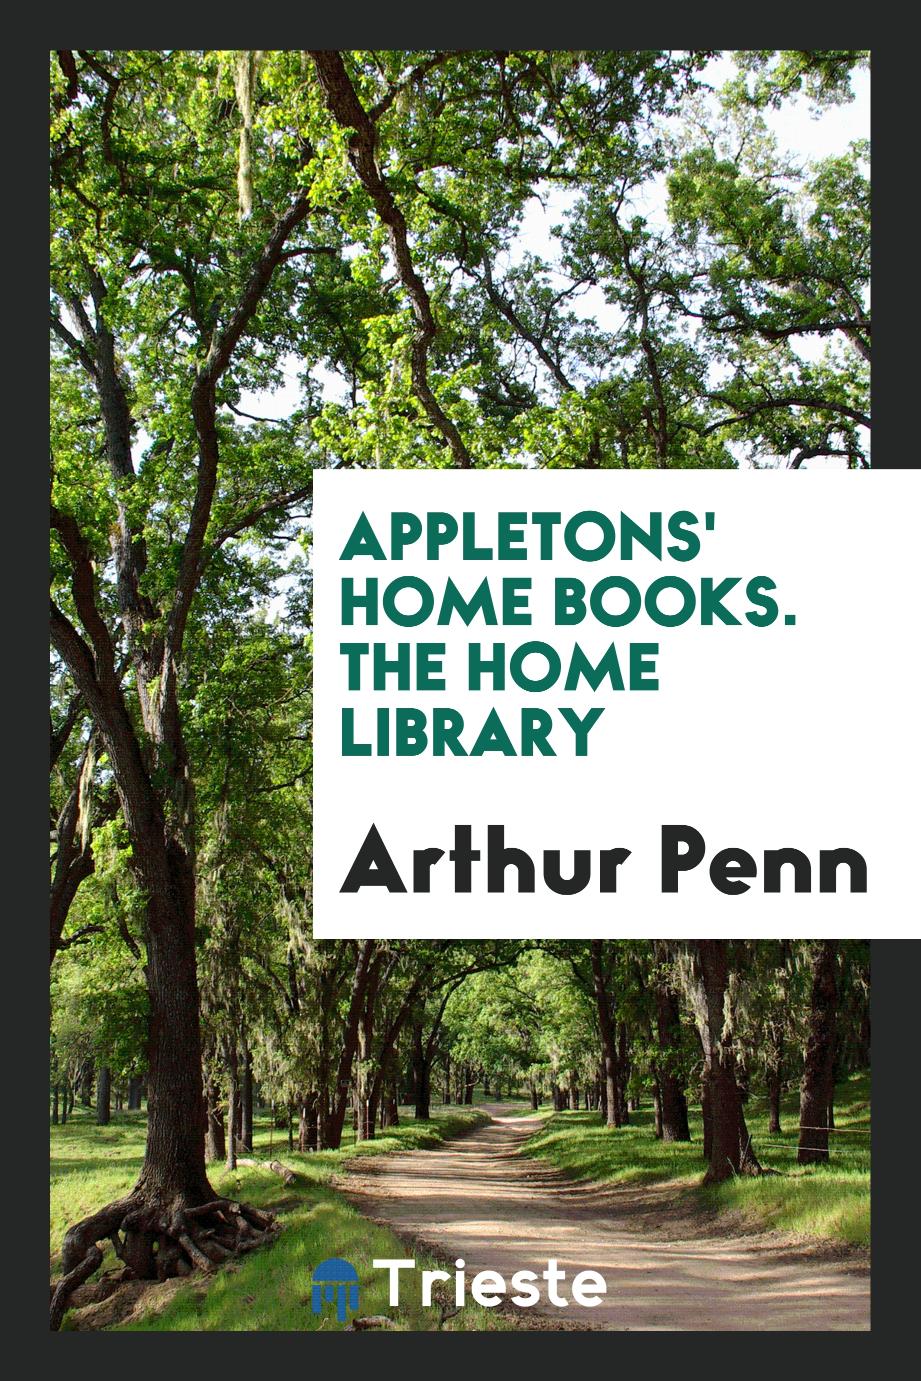 Appletons' Home Books. The Home Library